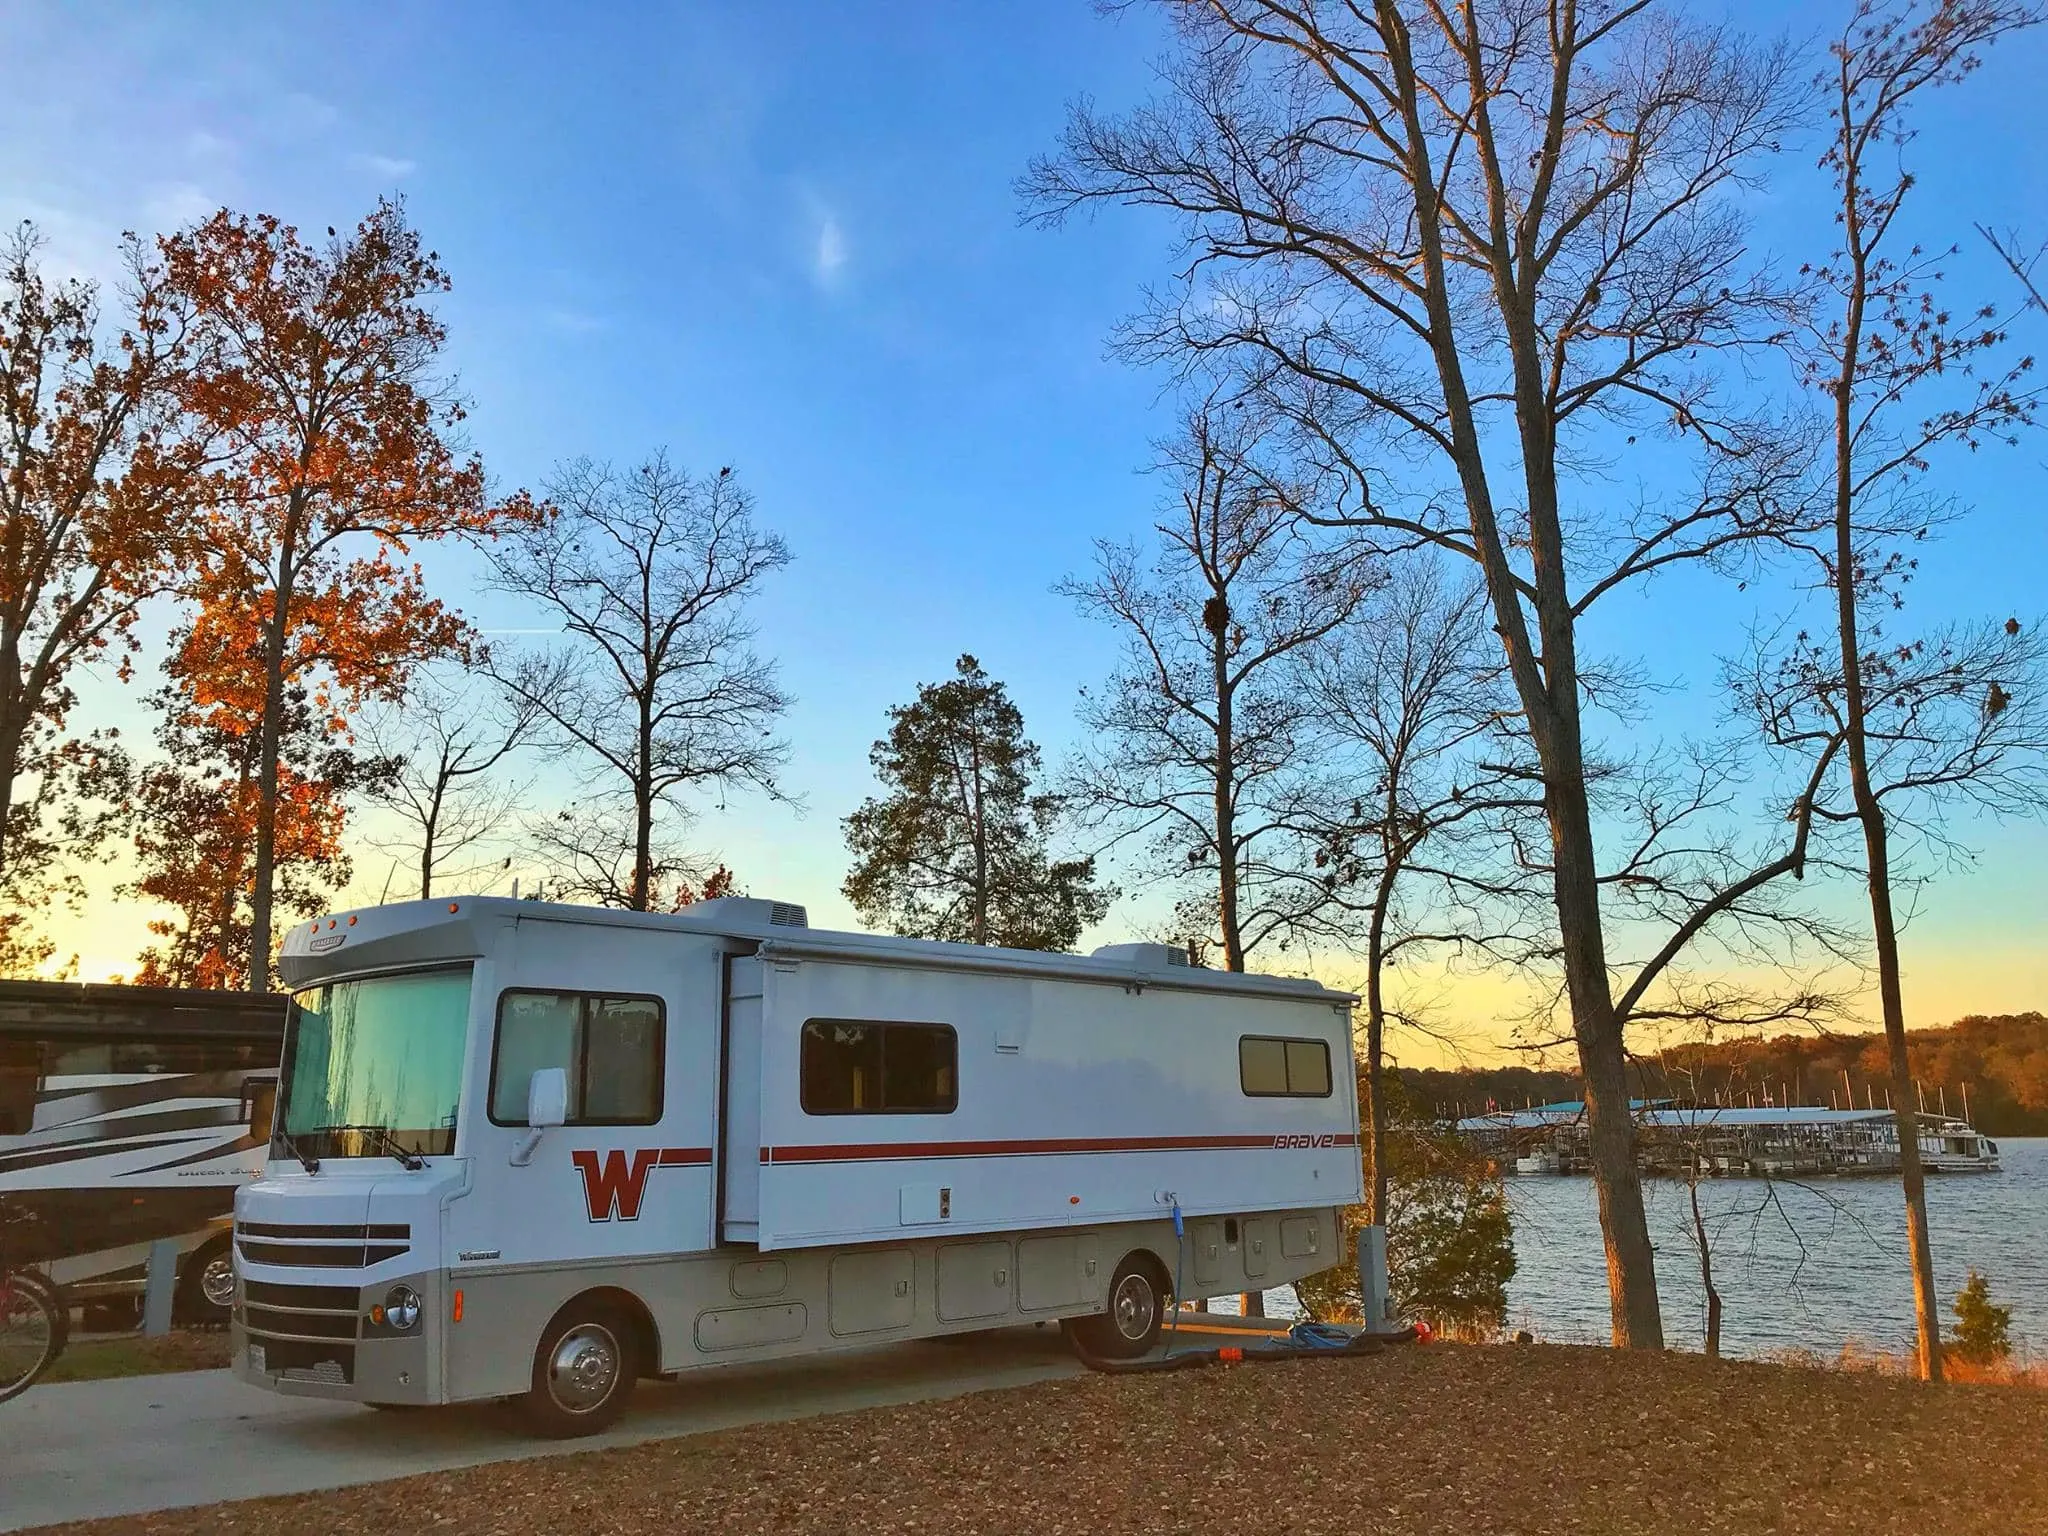 Heath and Alyssa Padgett's Winnebago Brave is a prime example of making money from renting out your RV!